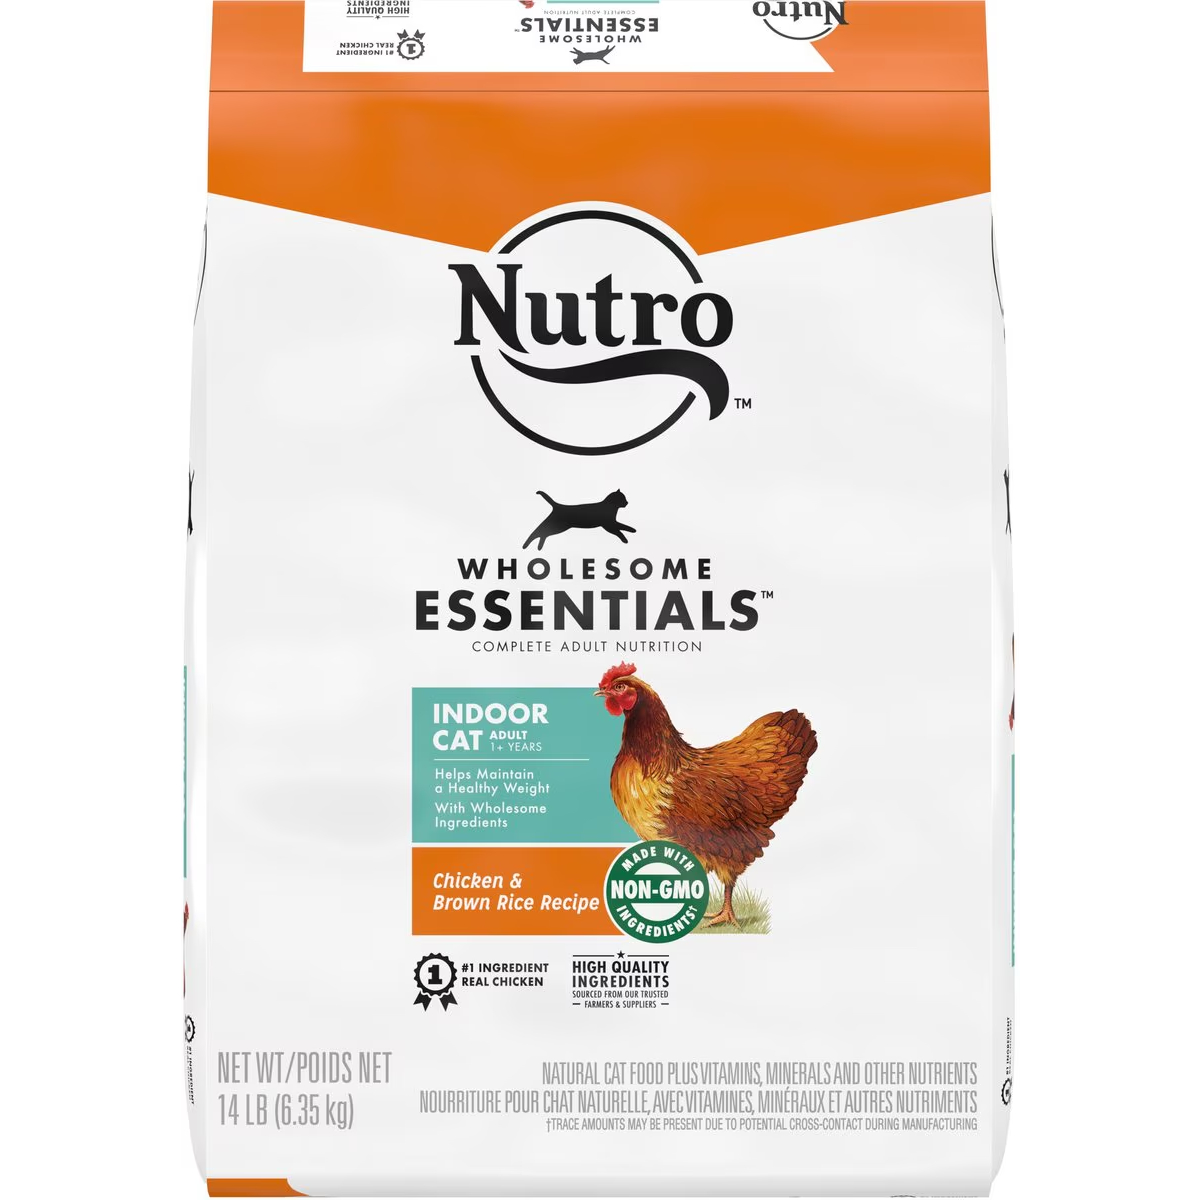 Nutro Wholesome Essentials Indoor Chicken & Brown Rice Recipe Adult Dry Cat Food New